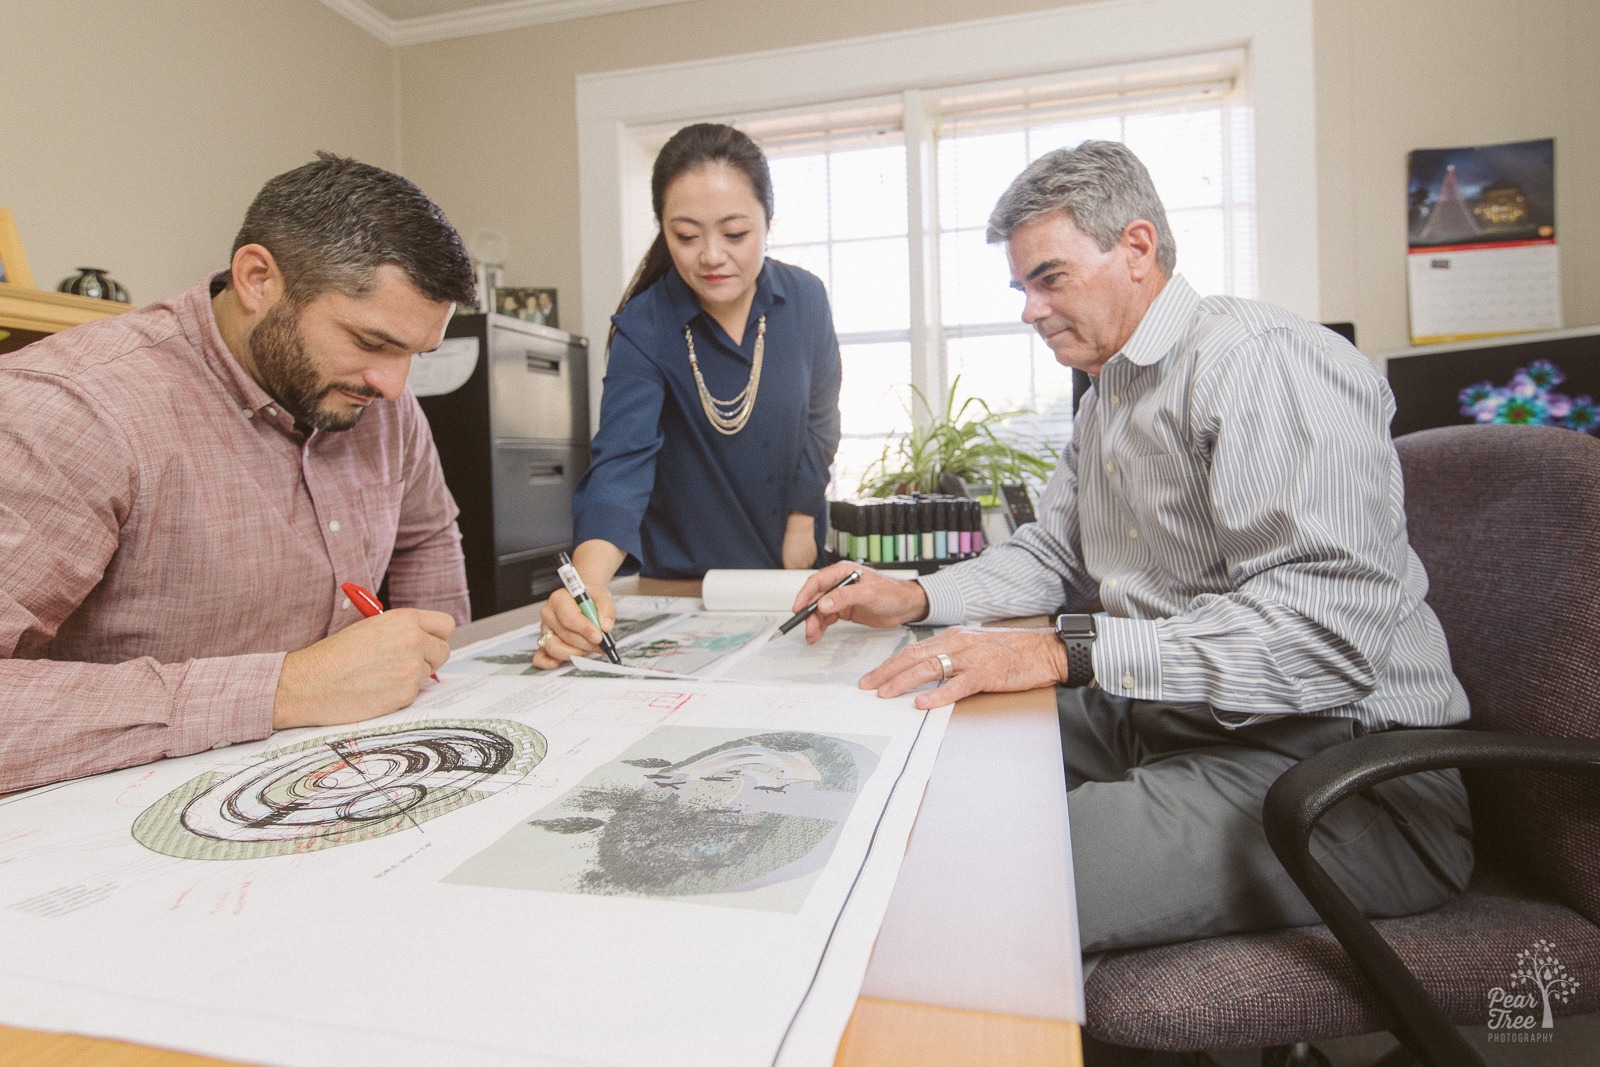 Team of three landscape architects working together on blueprints in Manley Land Design office.